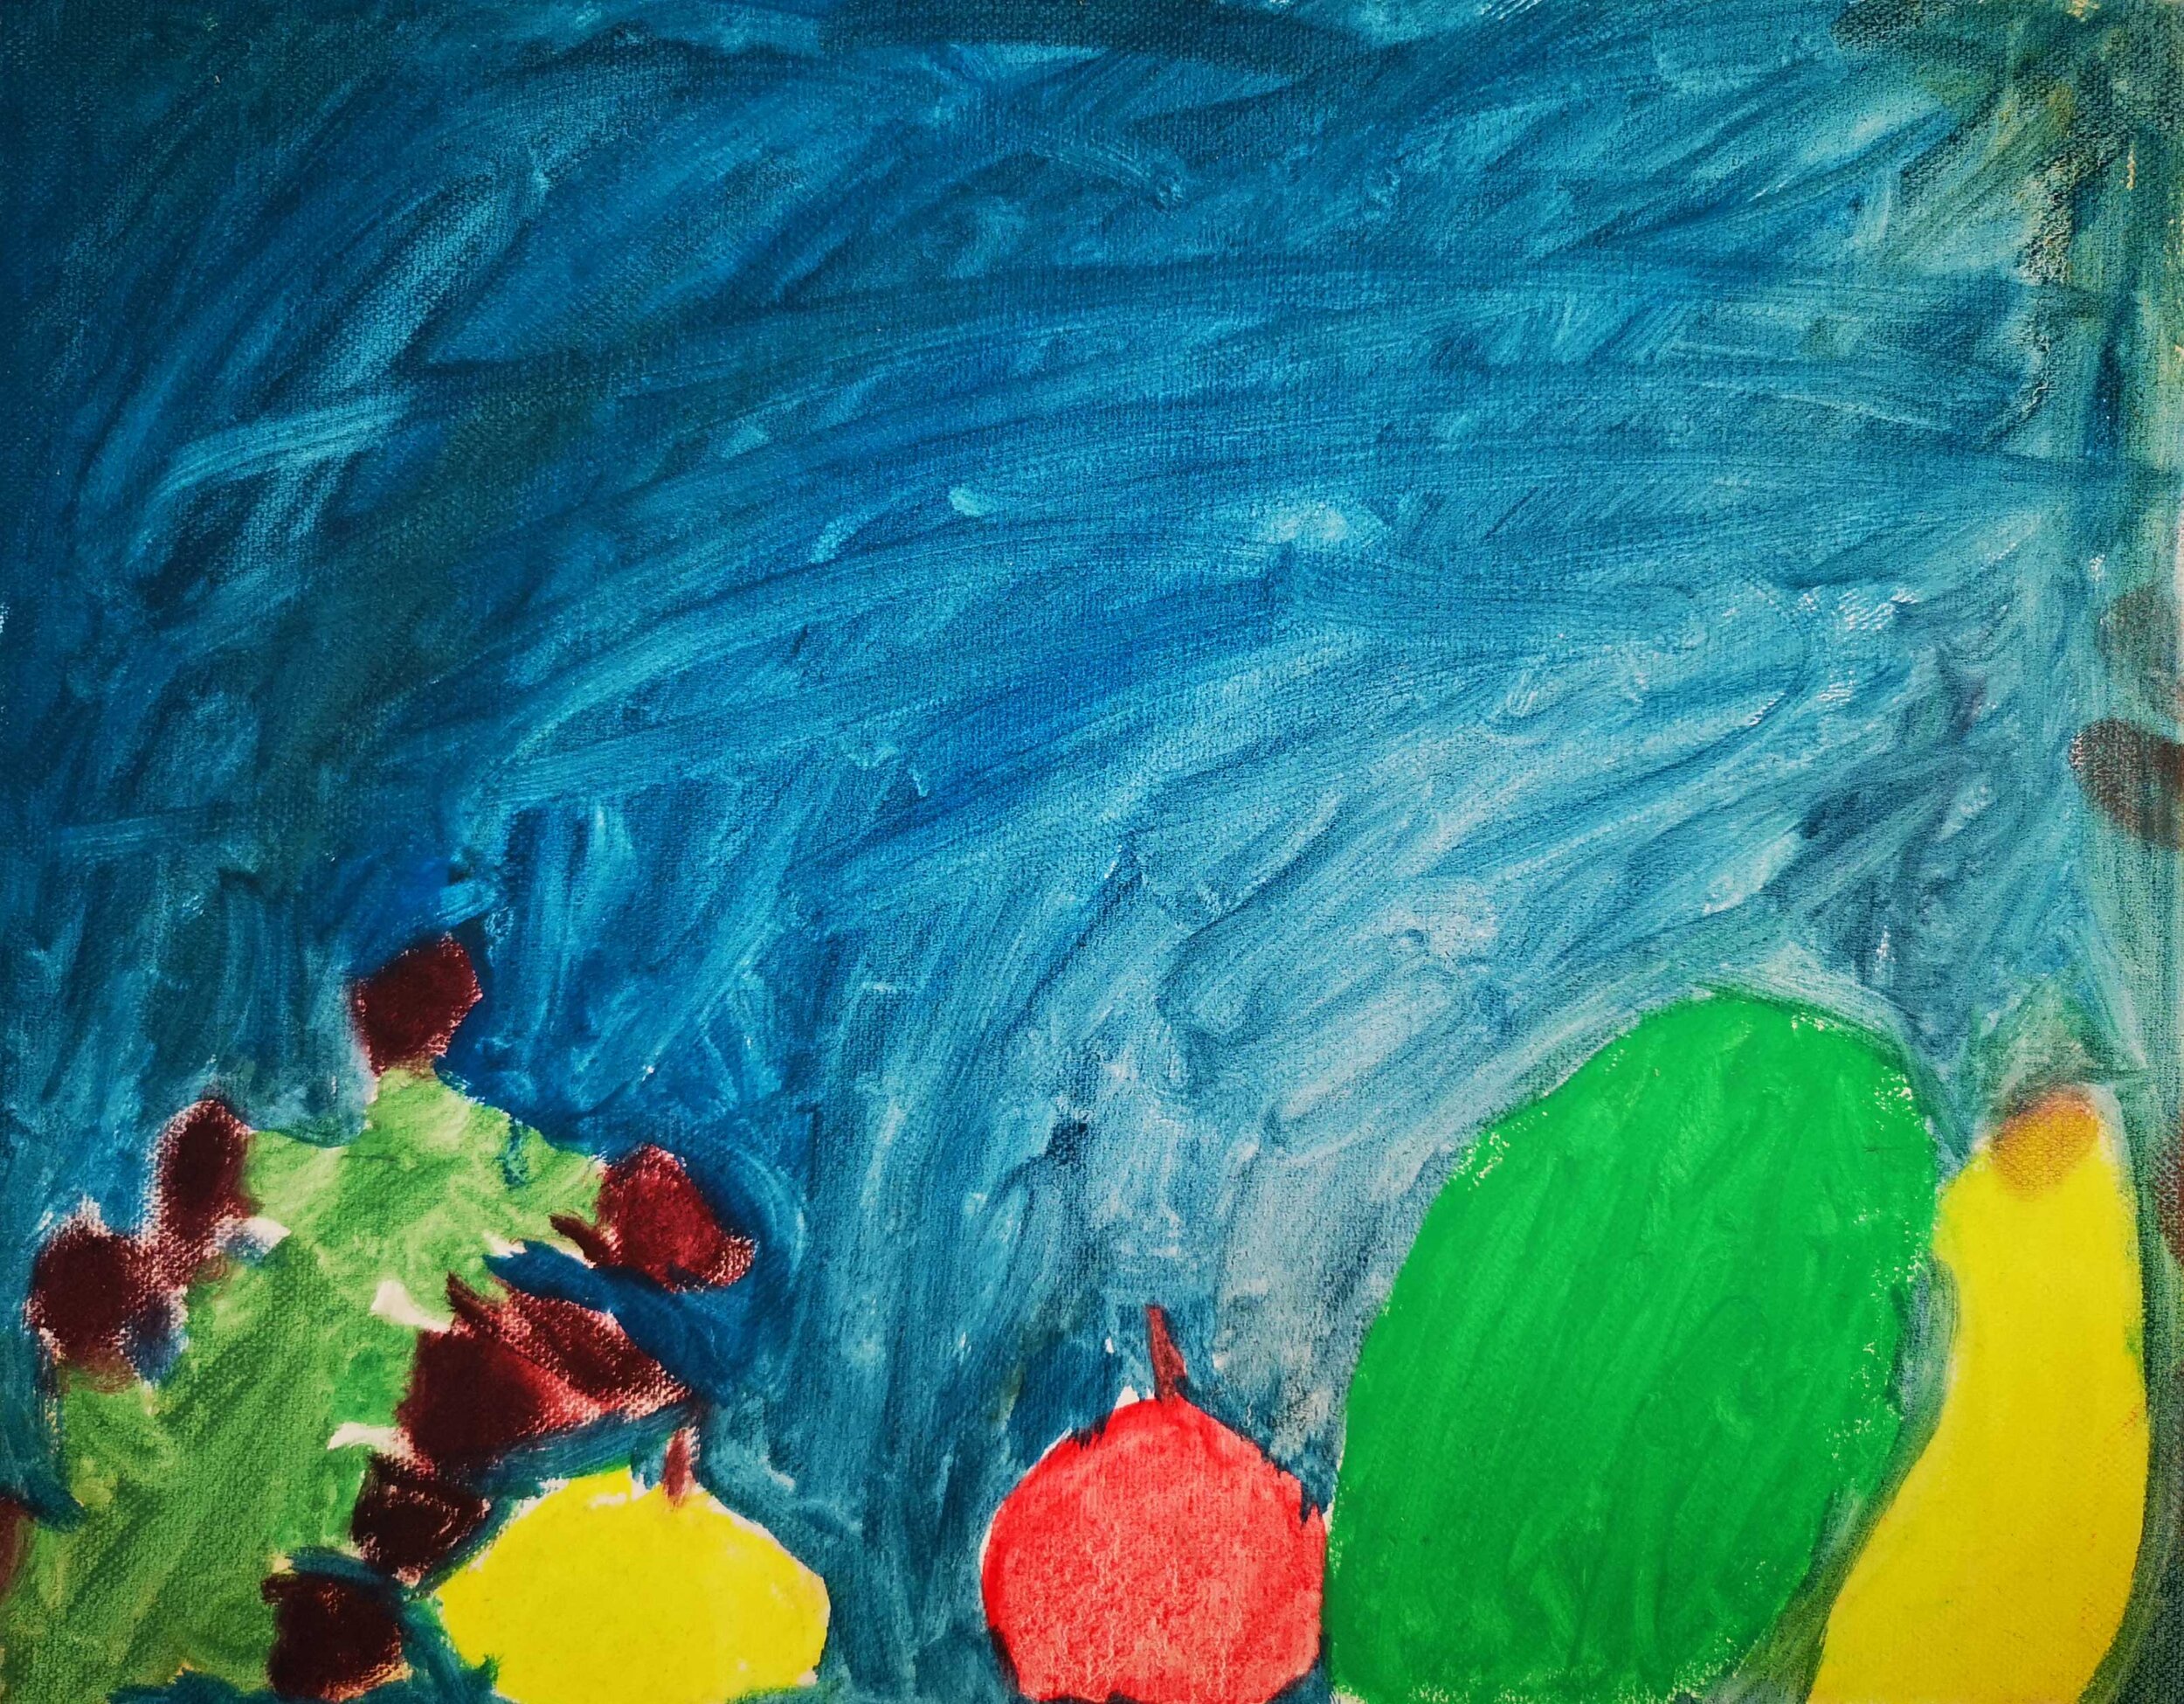 The Fruits by Freya Evans age 6